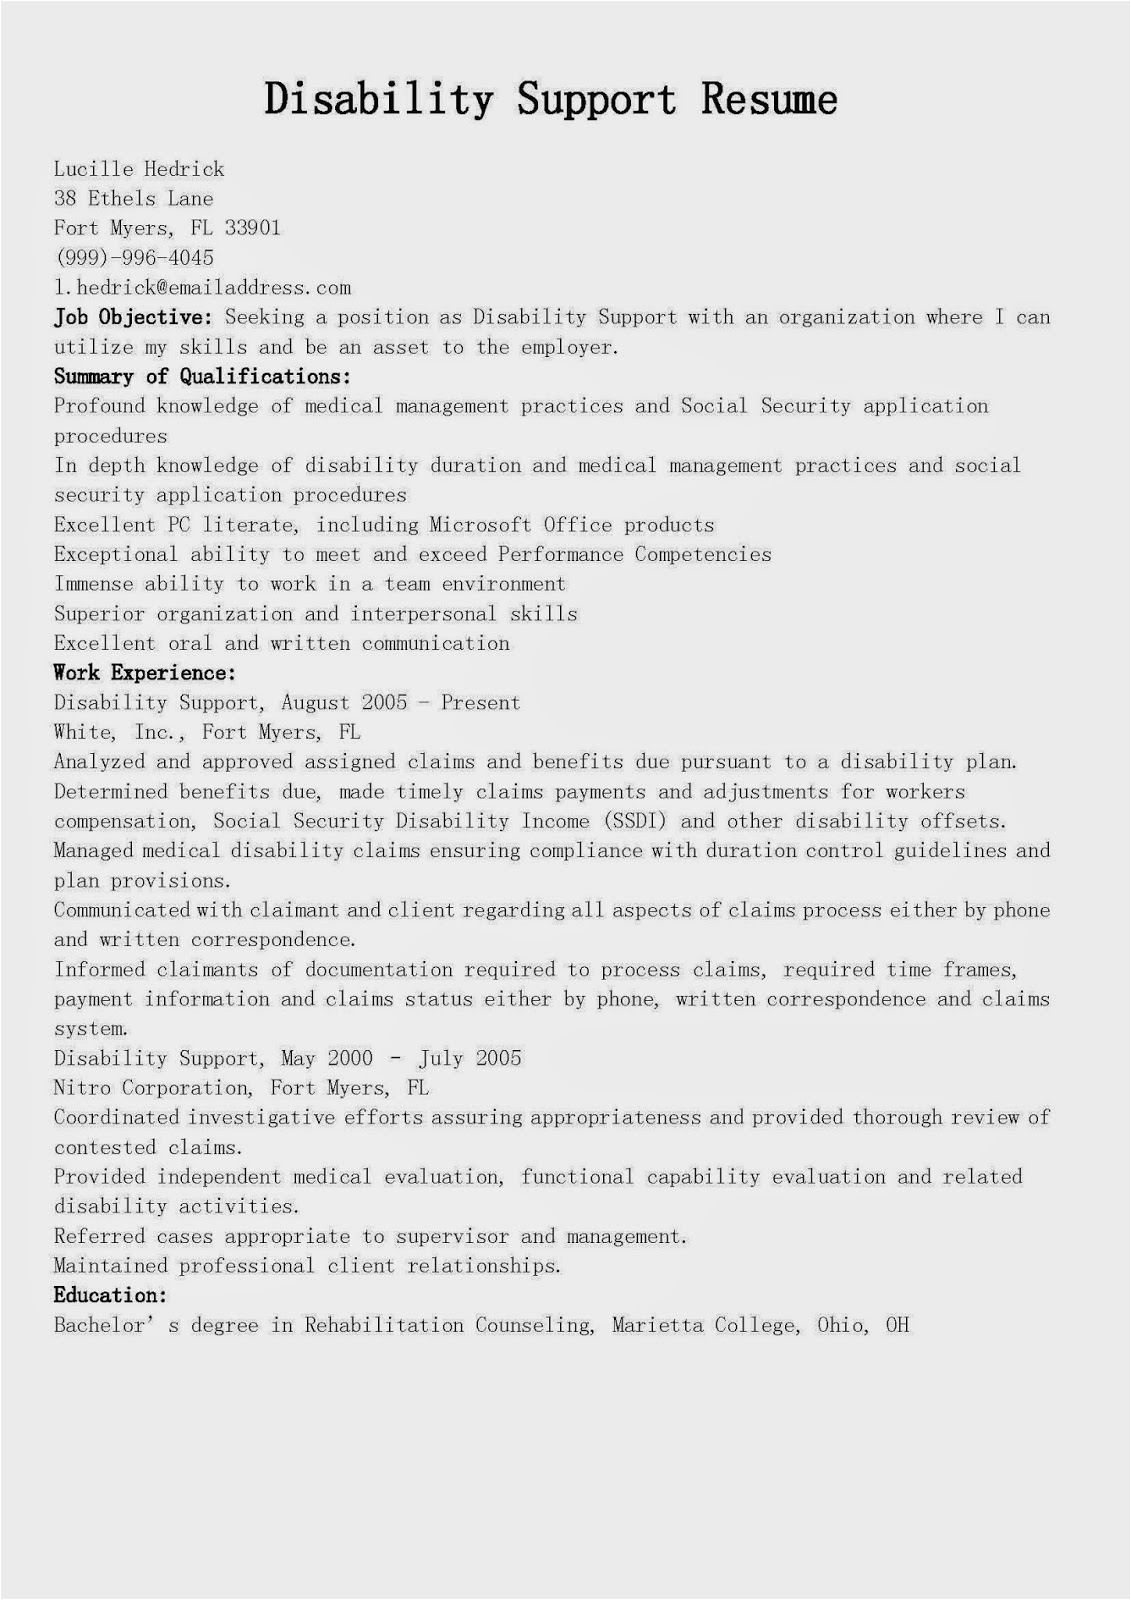 disability support resume sample